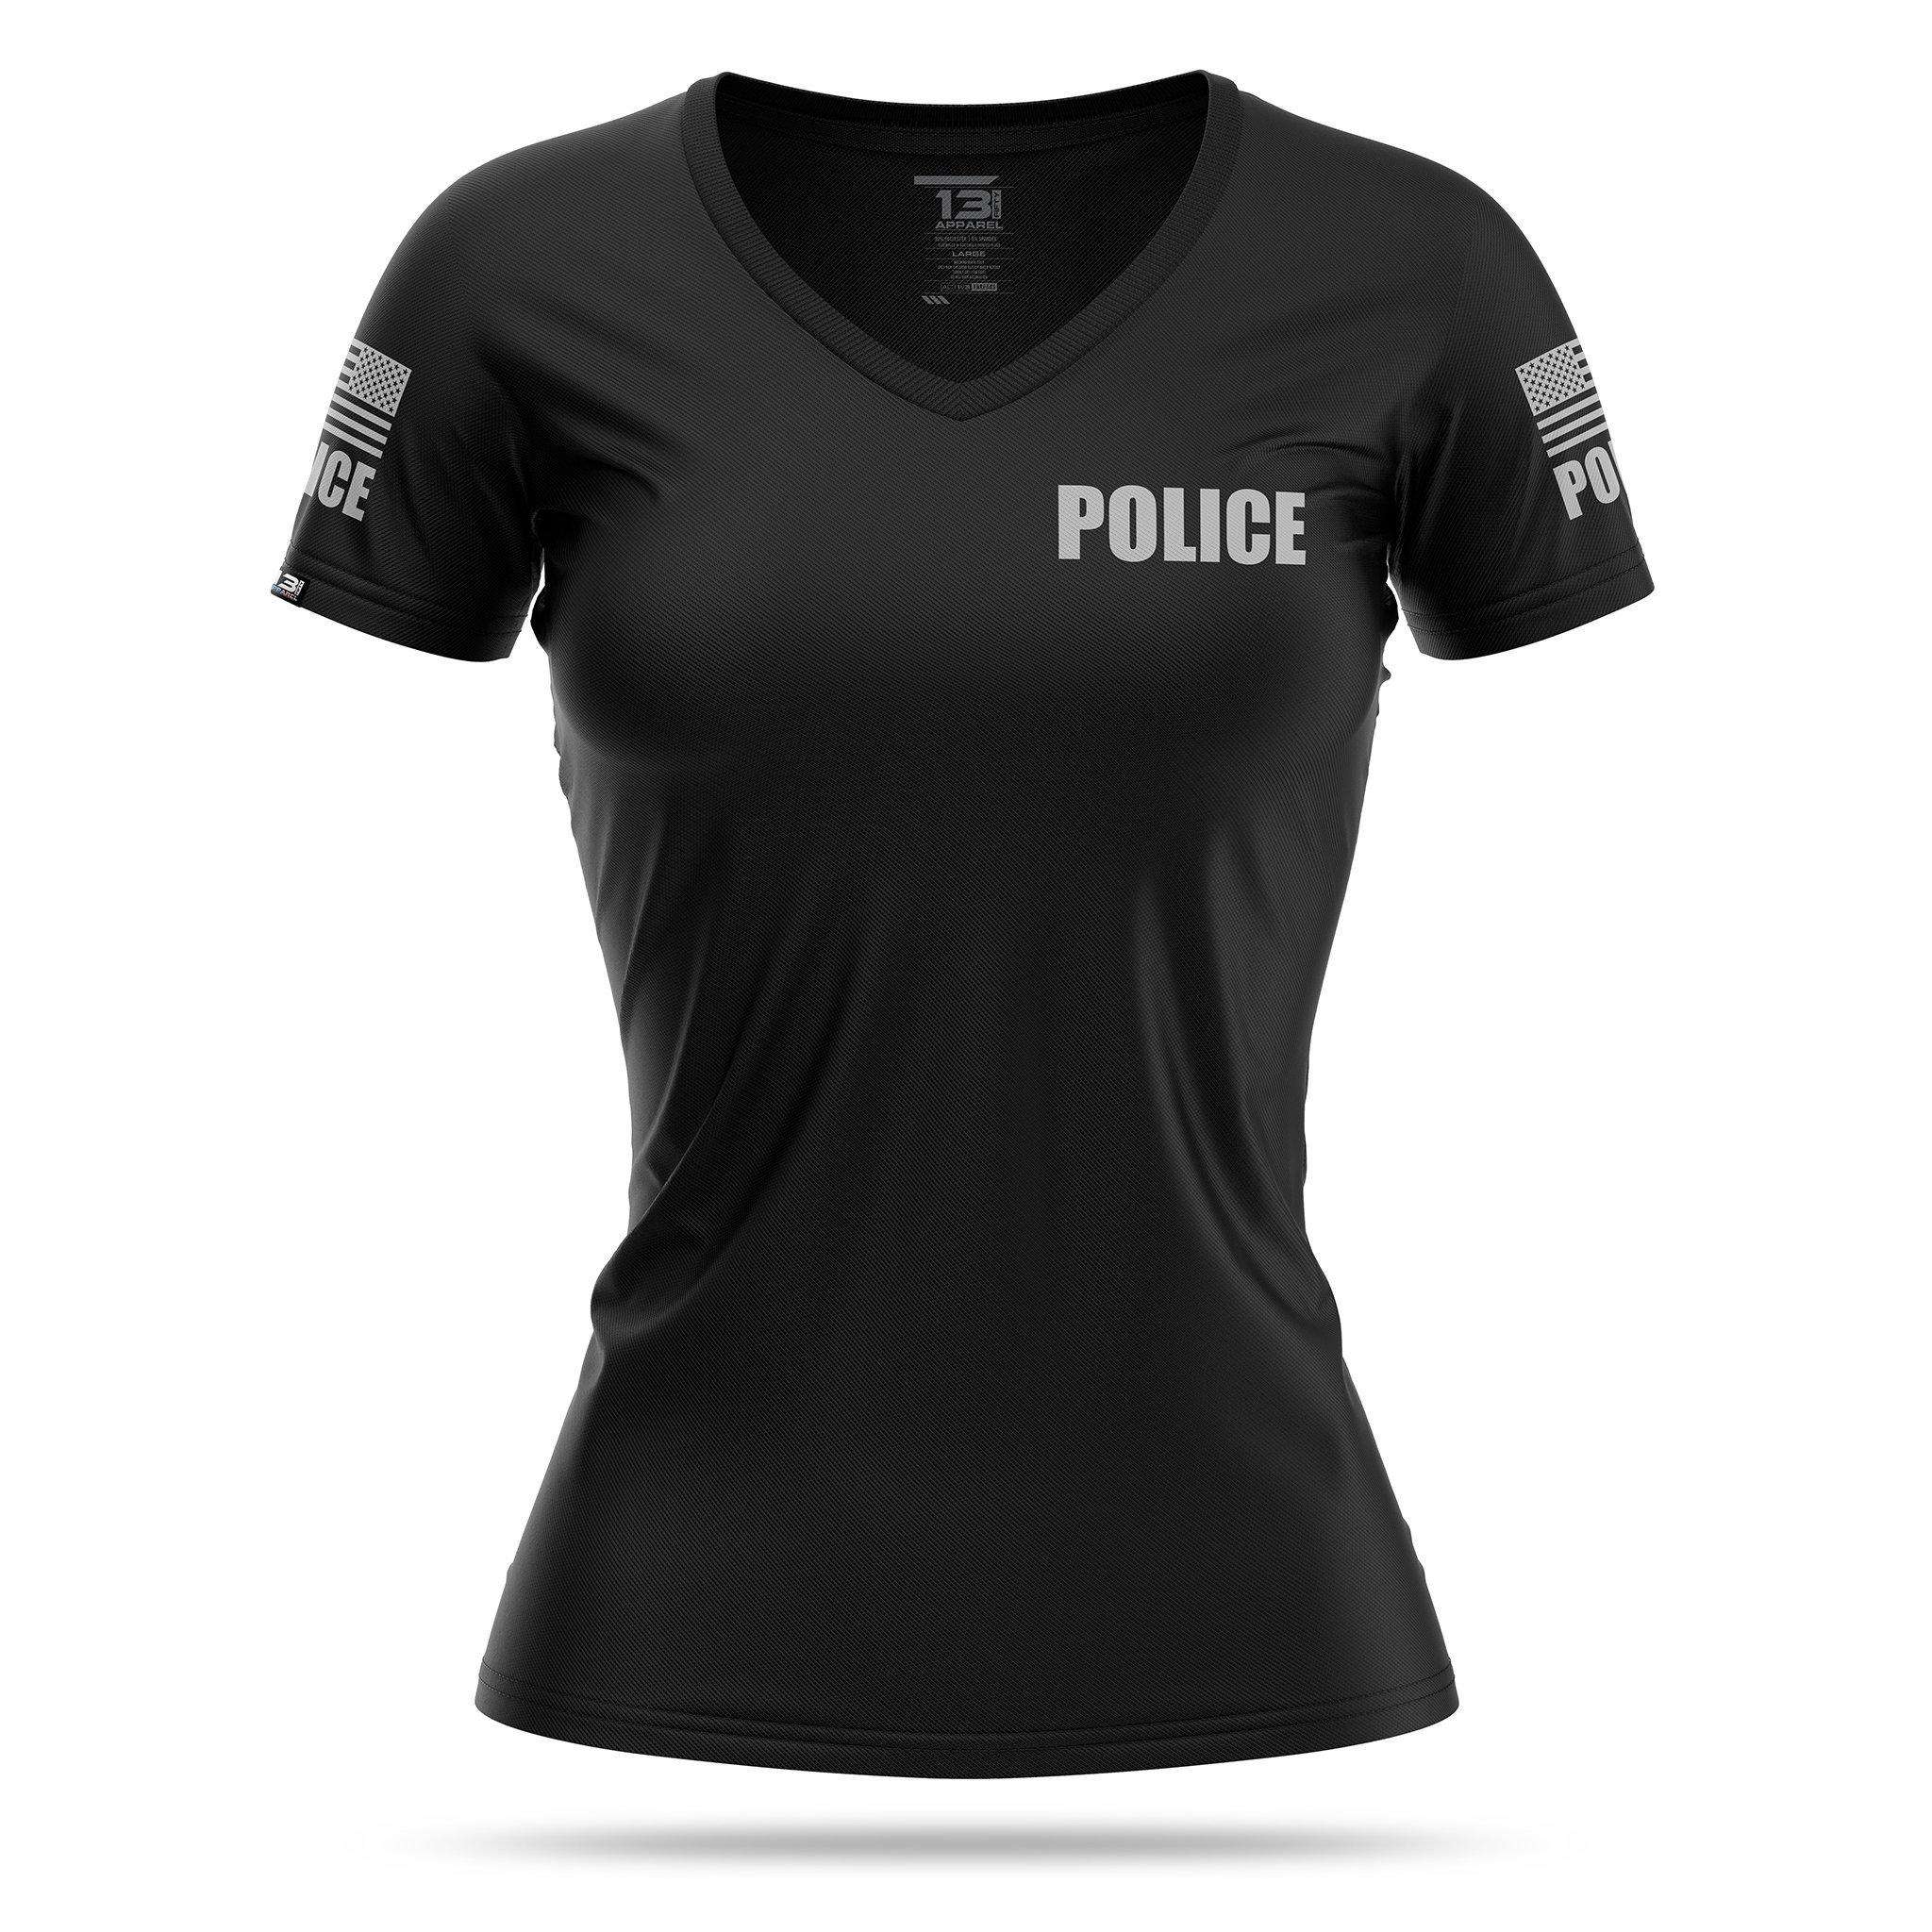 ON-DUTY SHIRTS WOMENS | 13 Fifty Apparel